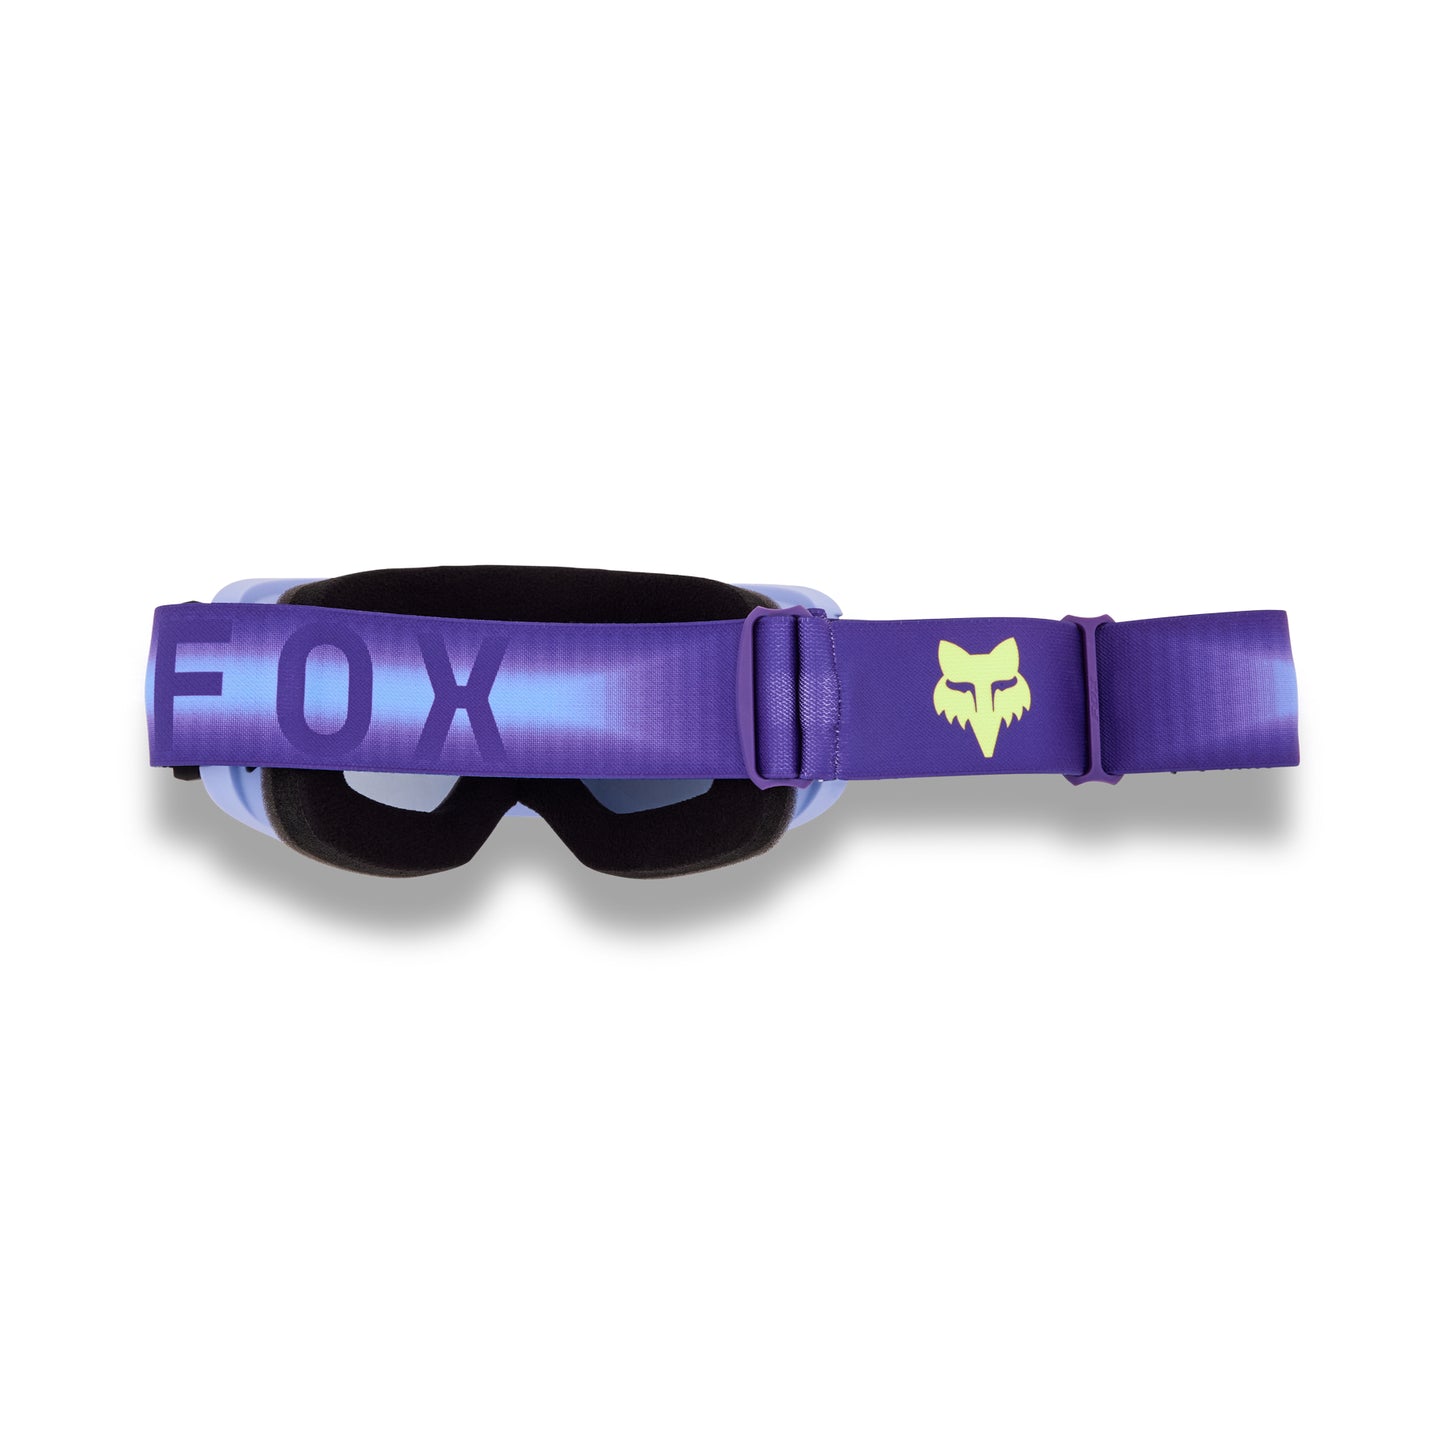 Fox Main Interfere Goggles - One Size Fits Most - Purple - Smoke Grey Lens - Image 2